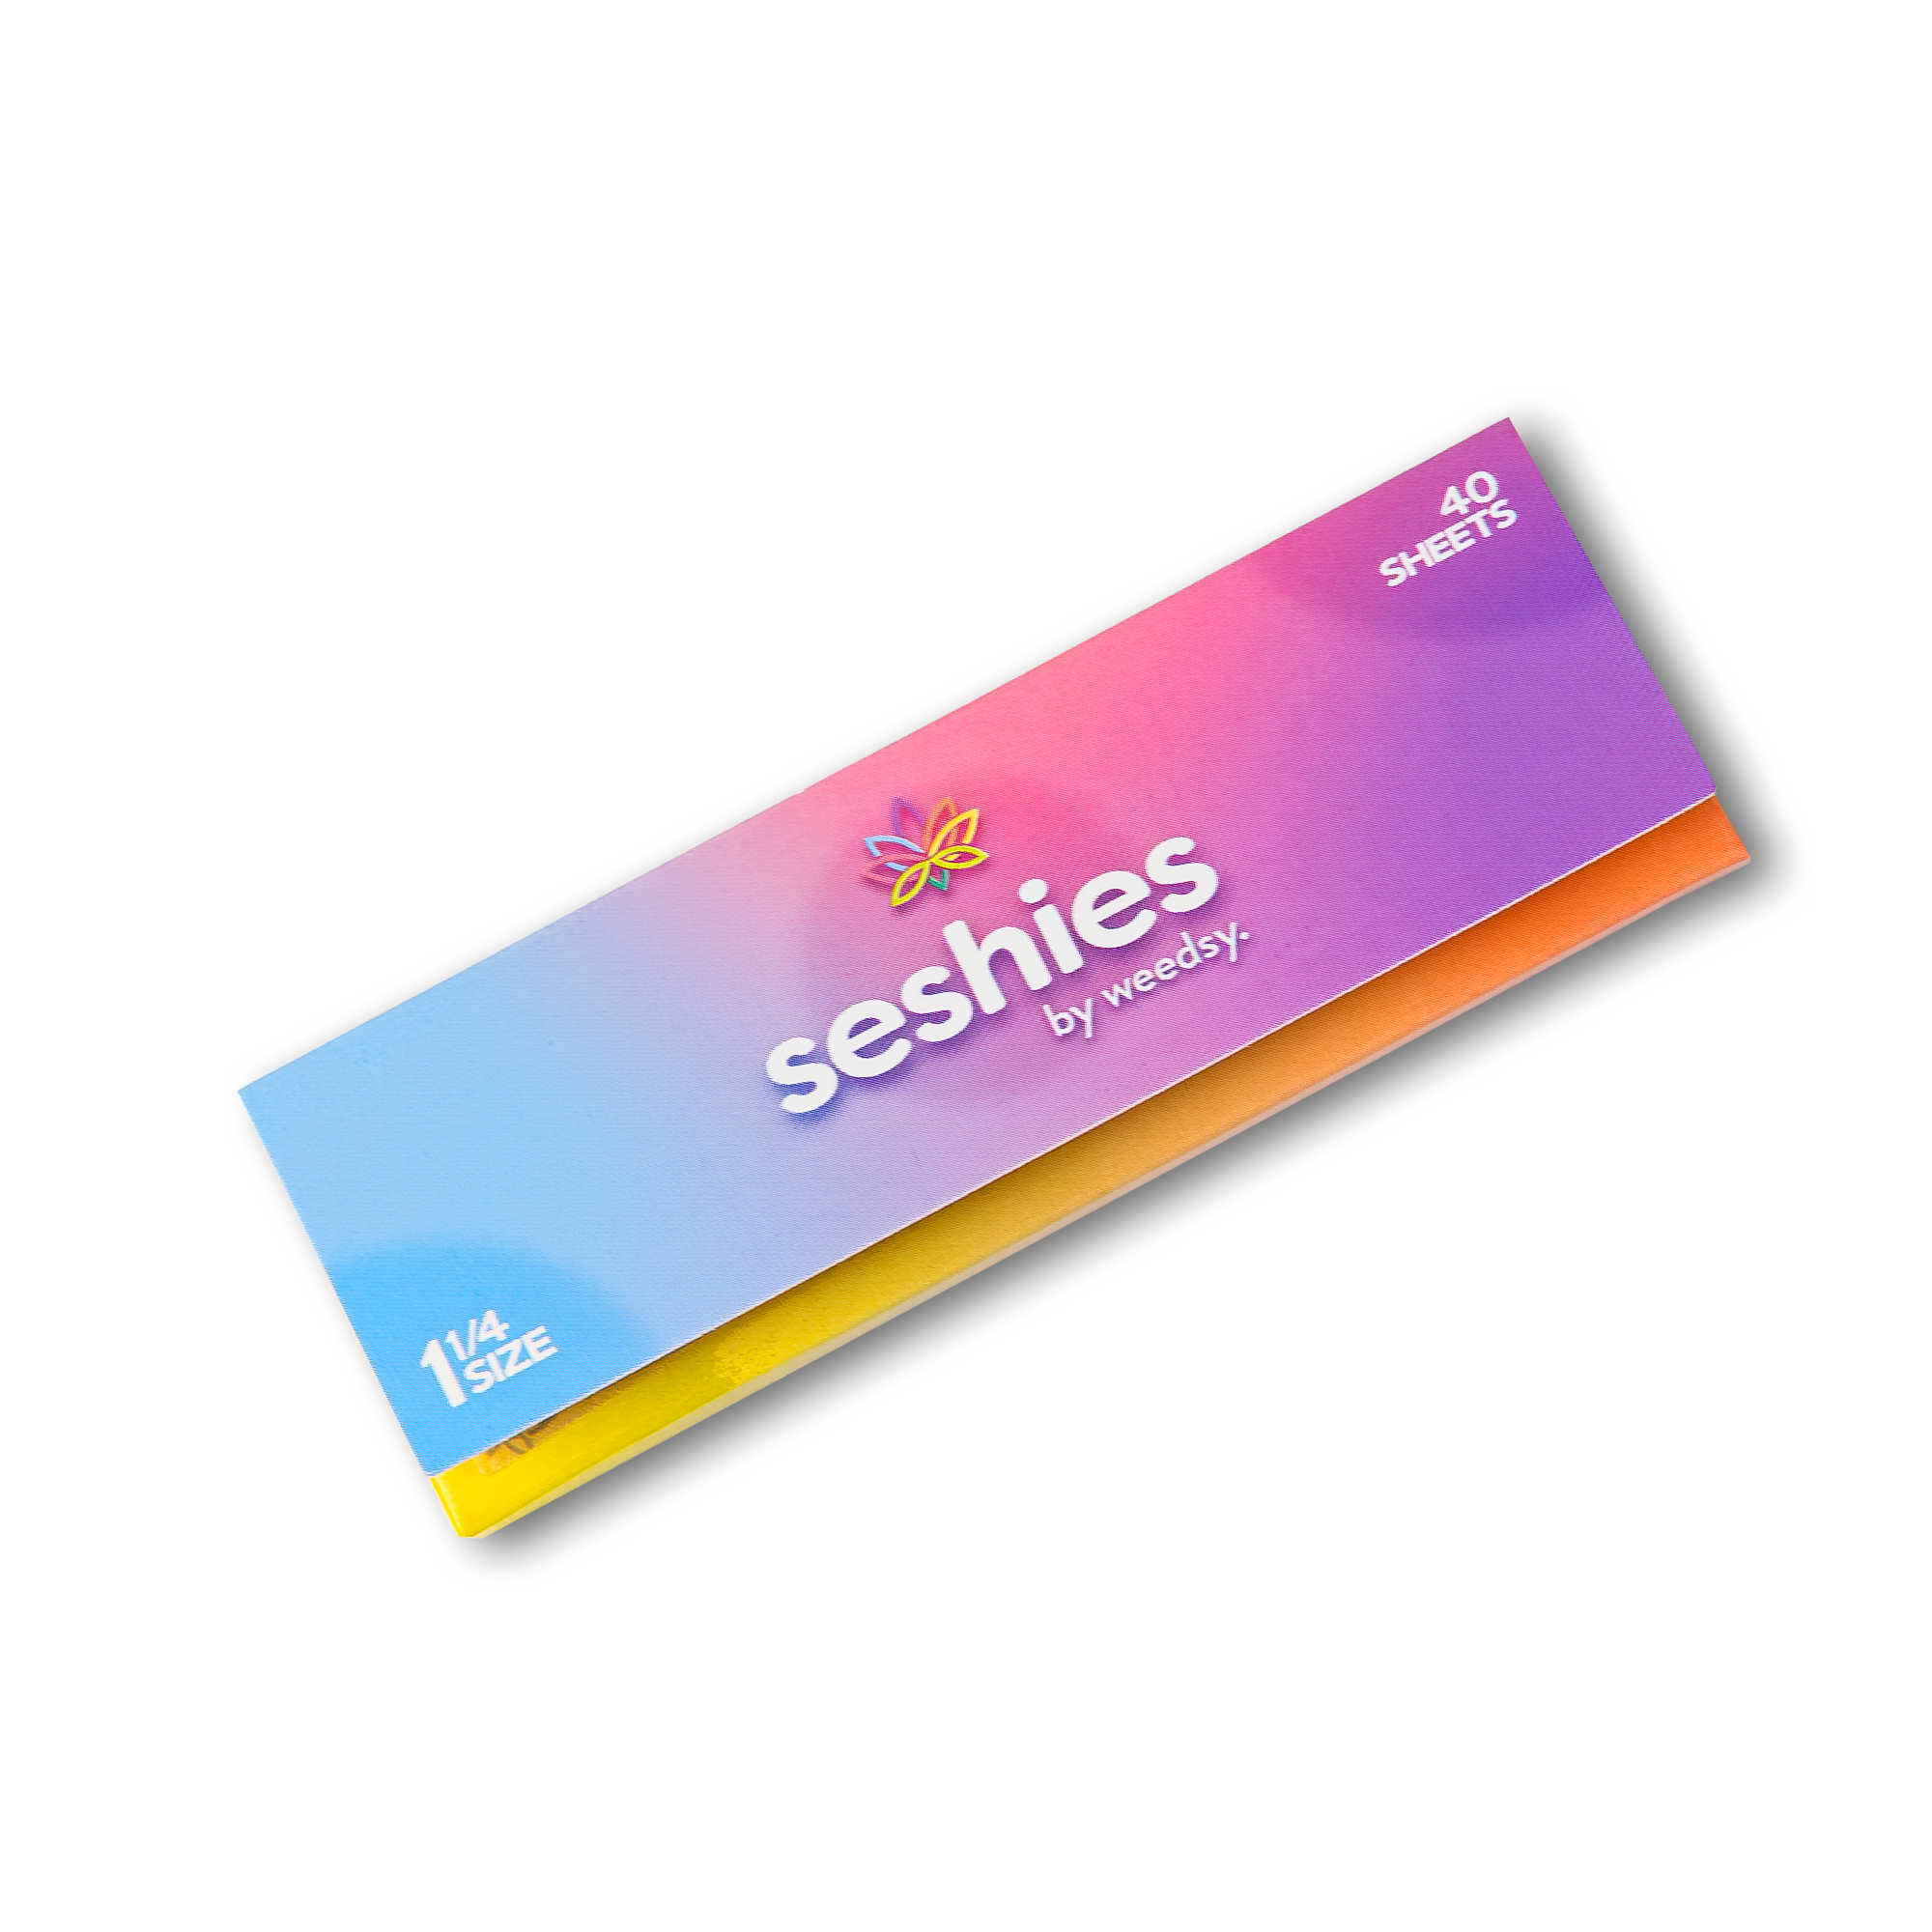 Seshies Rolling Paper